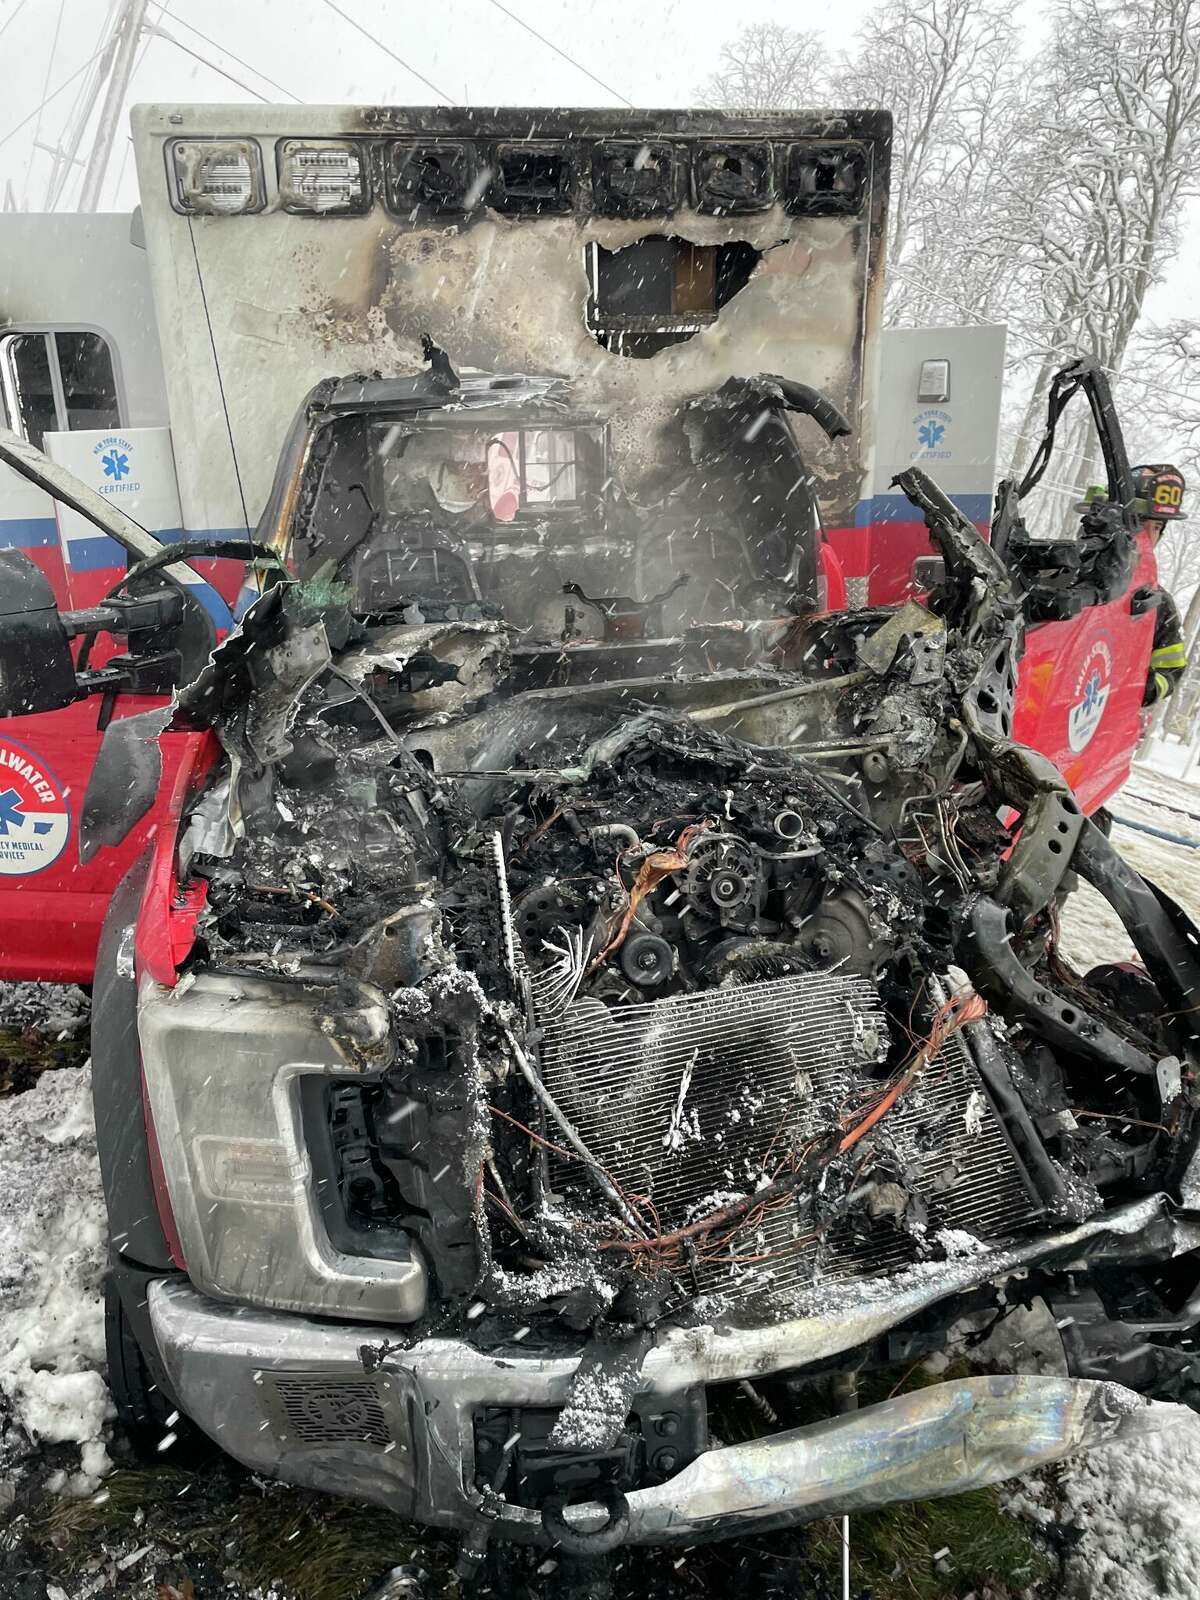 A paramedic and an emergency medical technician were hospitalized after pulling a patient from a Malta-Stillwater EMS ambulance that caught fire after a crash Monday on Route 9, authorities said.